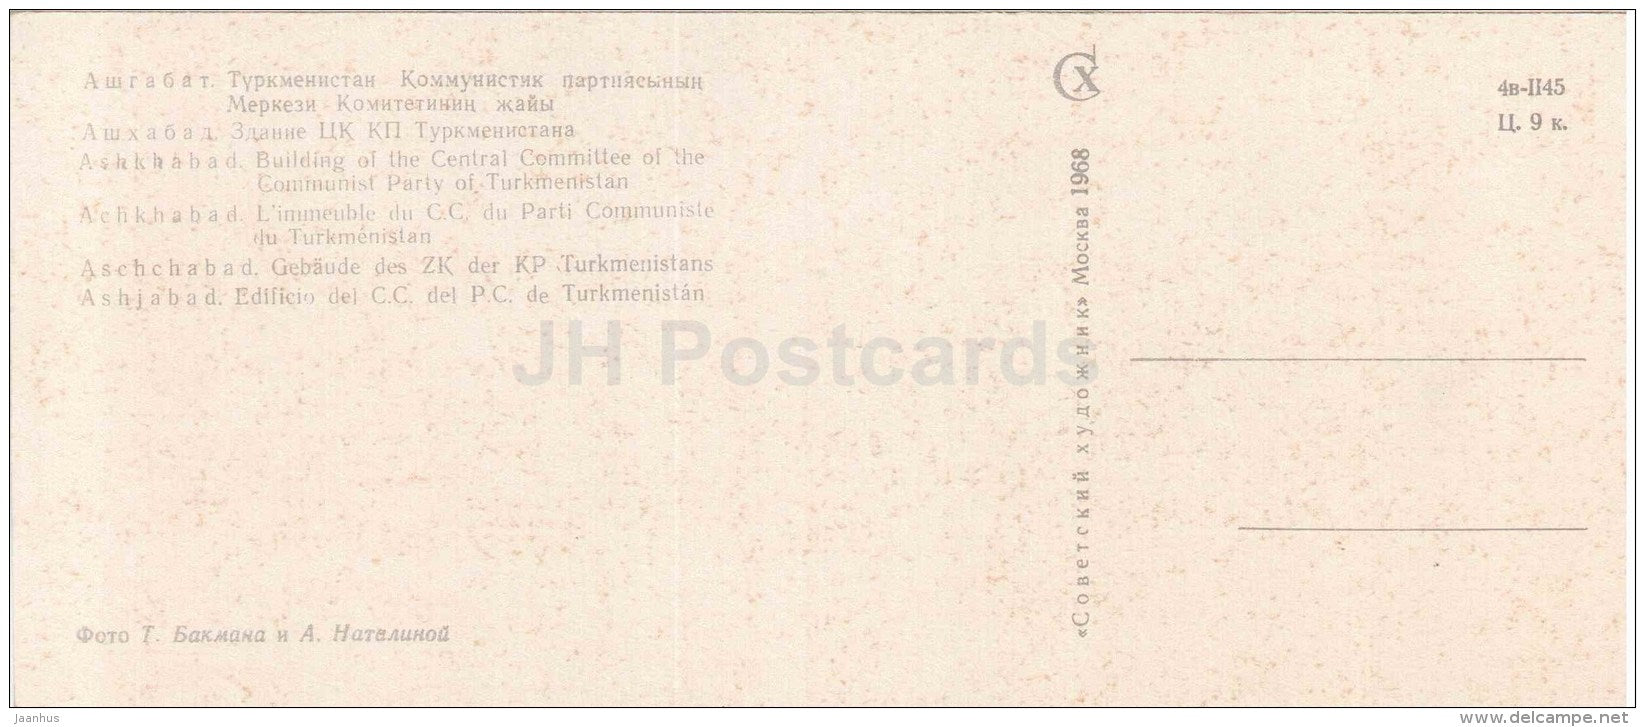 building of the Central Committee of the Communist Party - Ashkhabad - Ashgabat - 1968 - Turkmenistan USSR - unused - JH Postcards